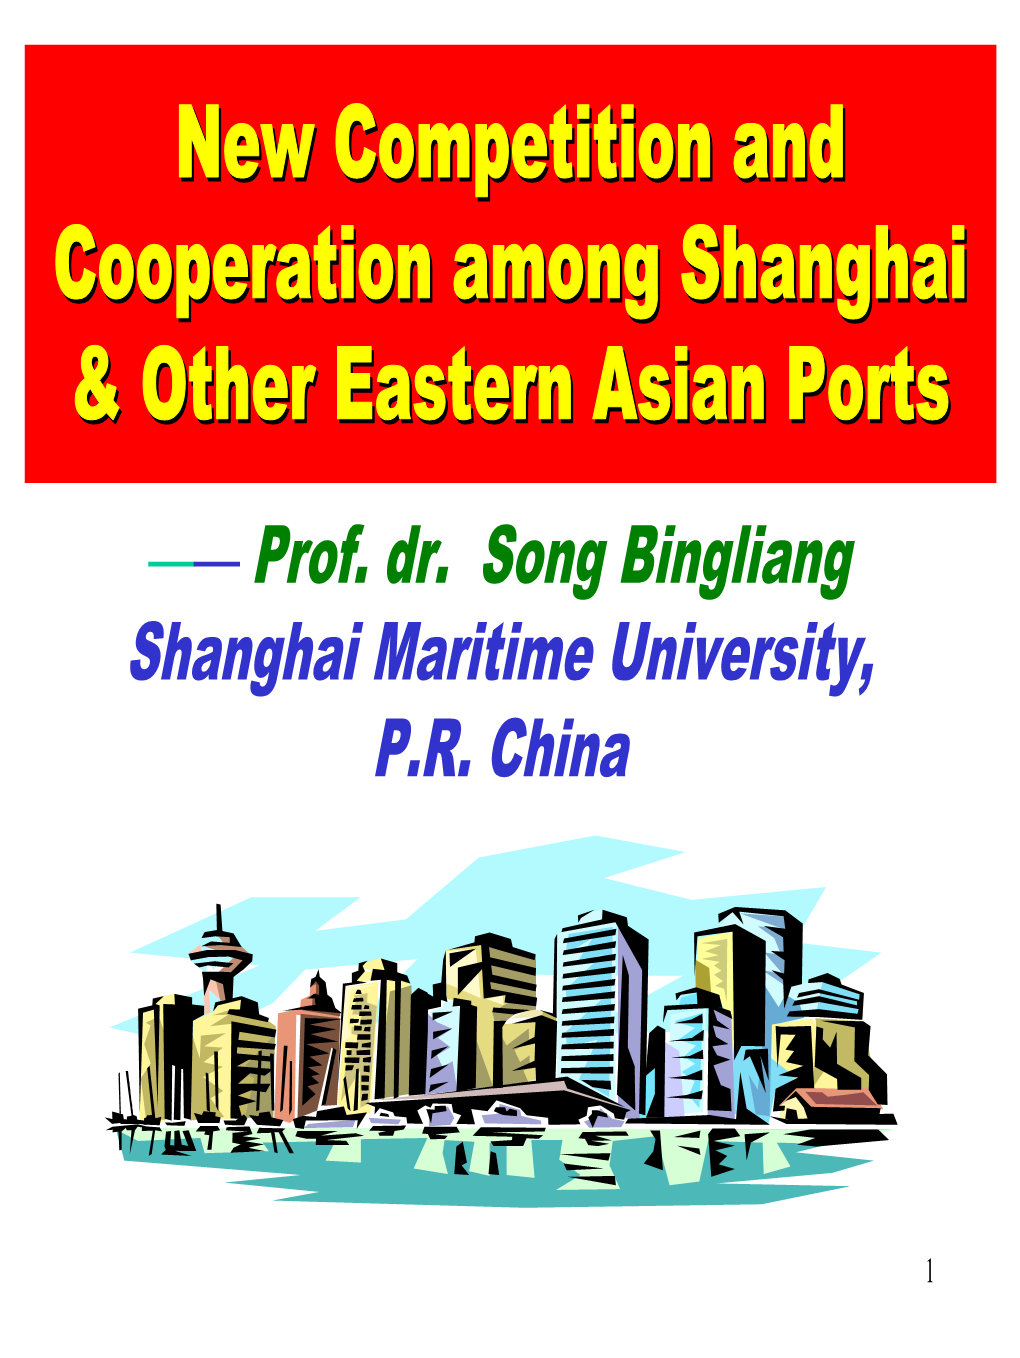 New Competition & Cooperation Among Shanghai & Asian Ports